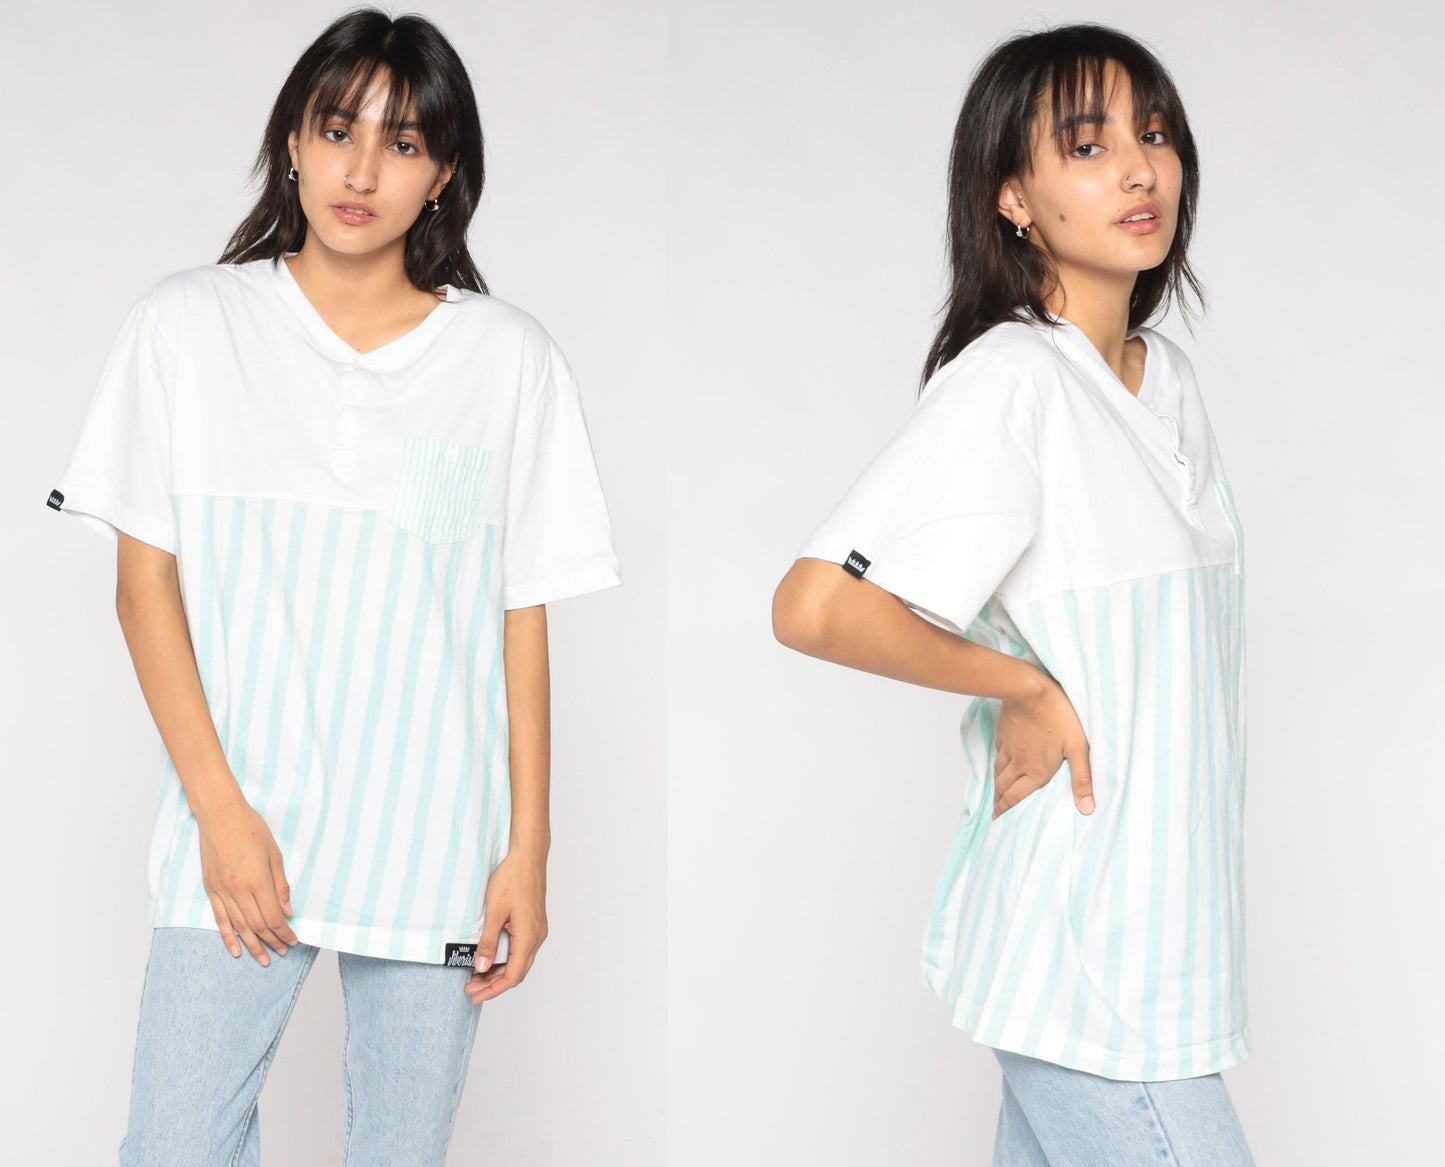 Striped Henley Shirt 90s Short Sleeve T-Shirt White Mint Green Stripes Button Up Pocket Tee Retro Basic Pastel Top Vintage 1990s Mens Large